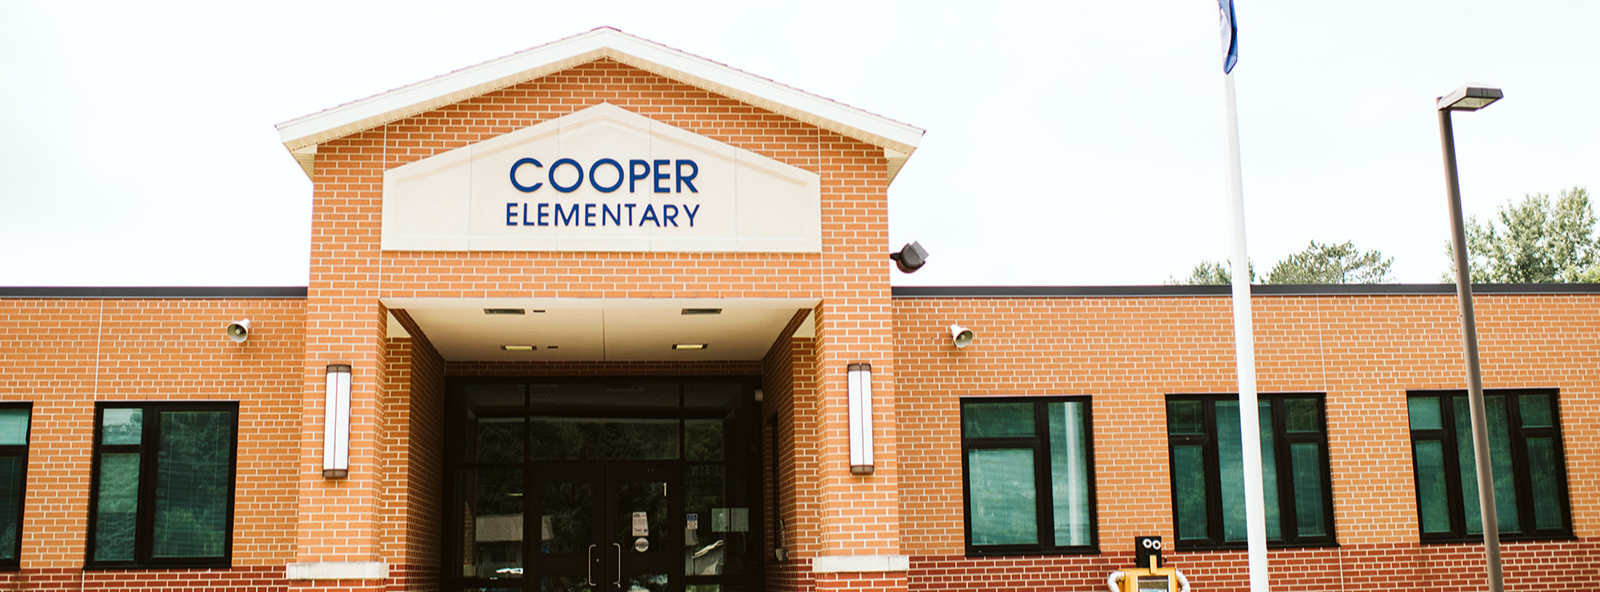 Exterior Picture of Cooper Elementary main entrance